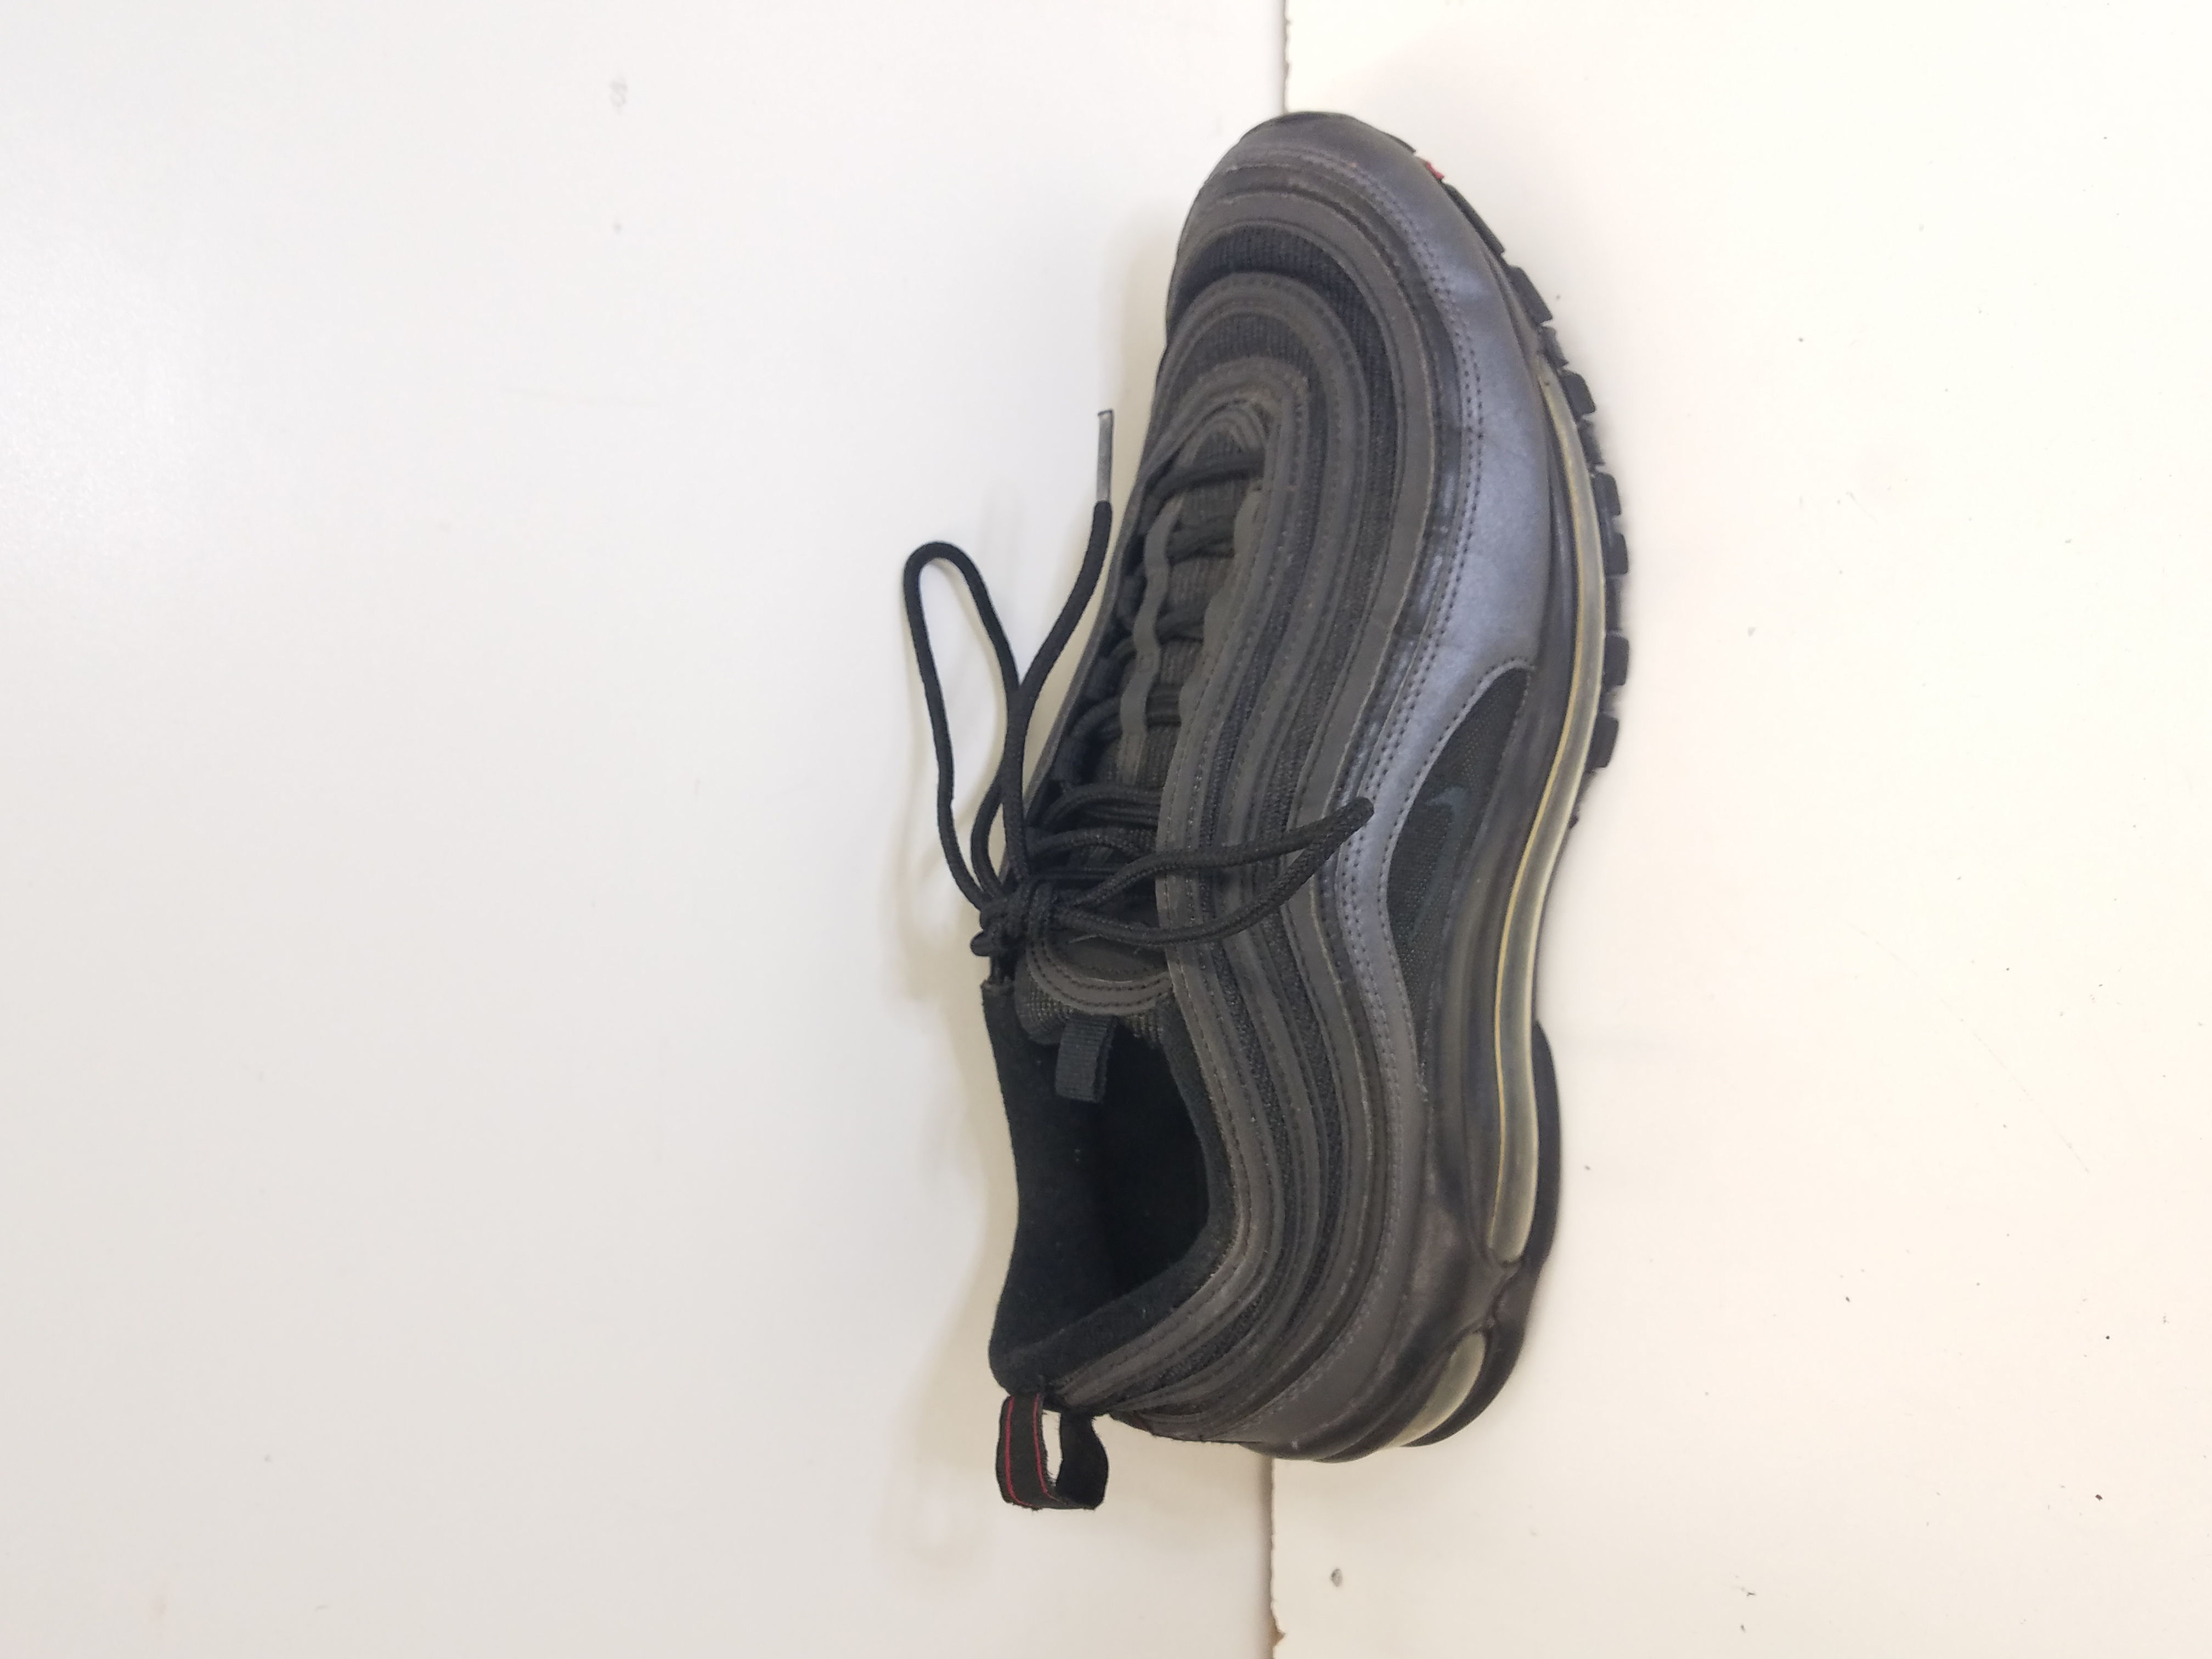 Buy the Nike Air Max 97 Metallic Hematite Men Shoes Size 10 GoodwillFinds